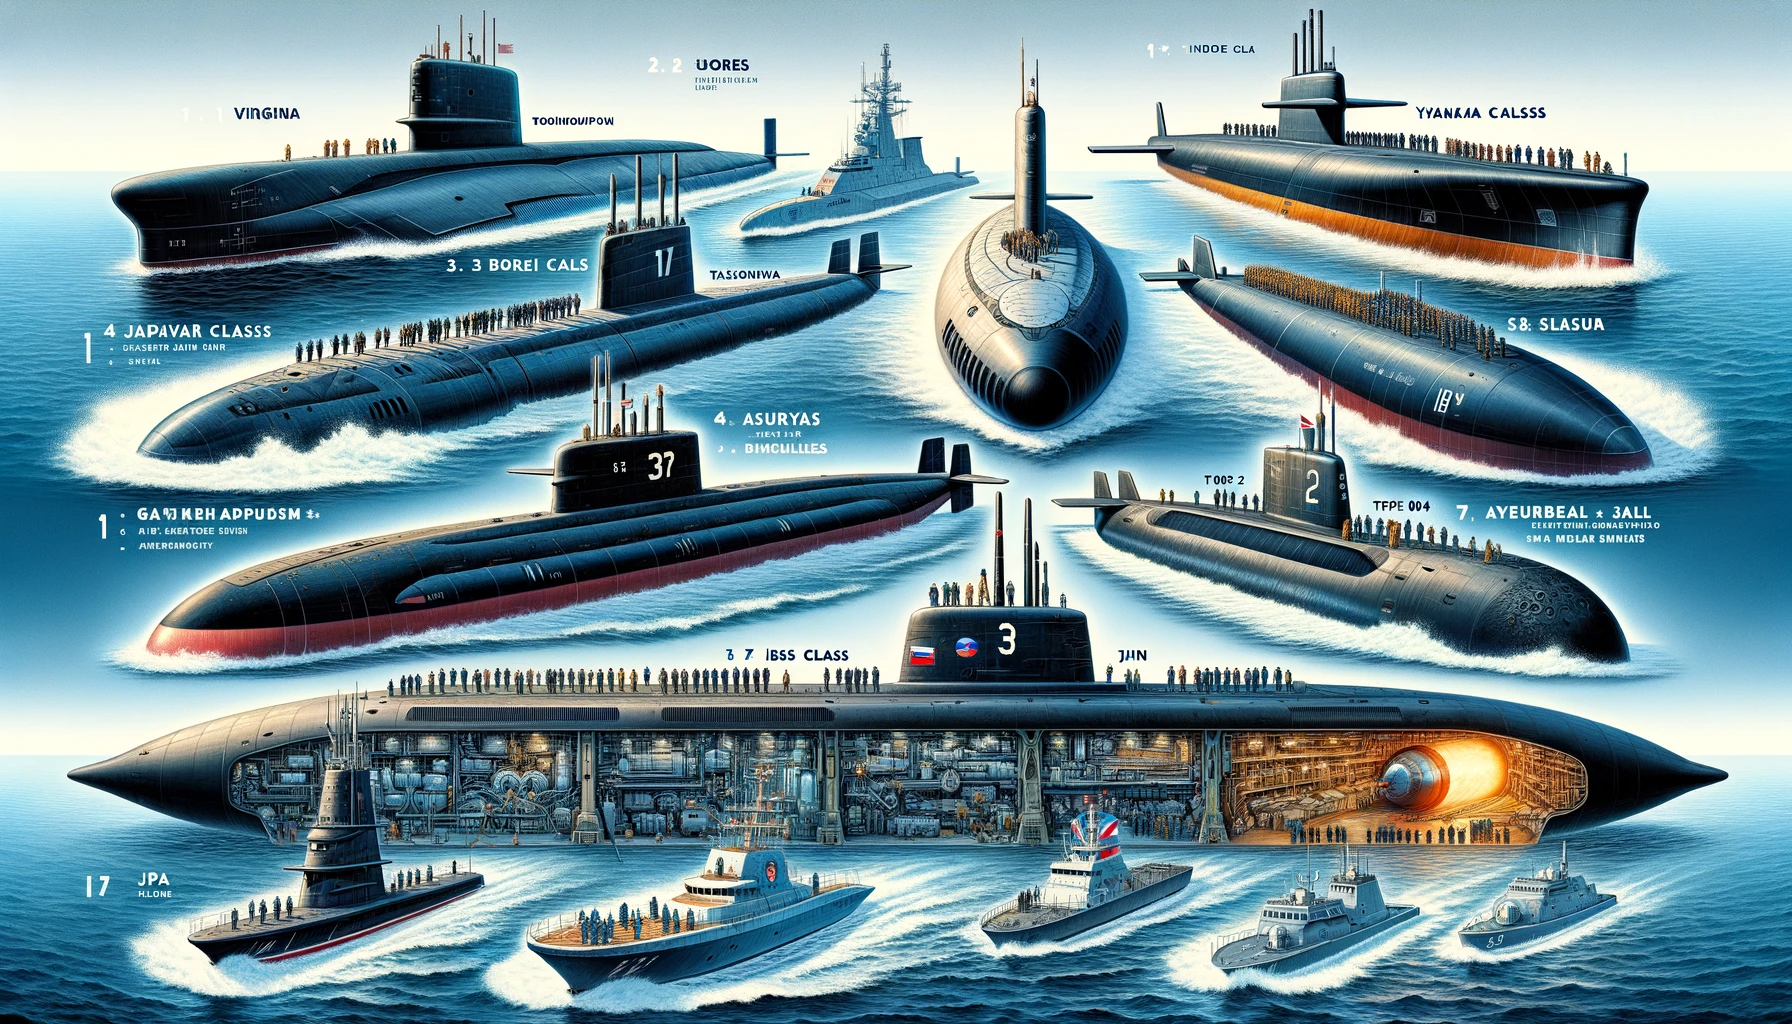 Top 7 Nuclear Submarines in the World